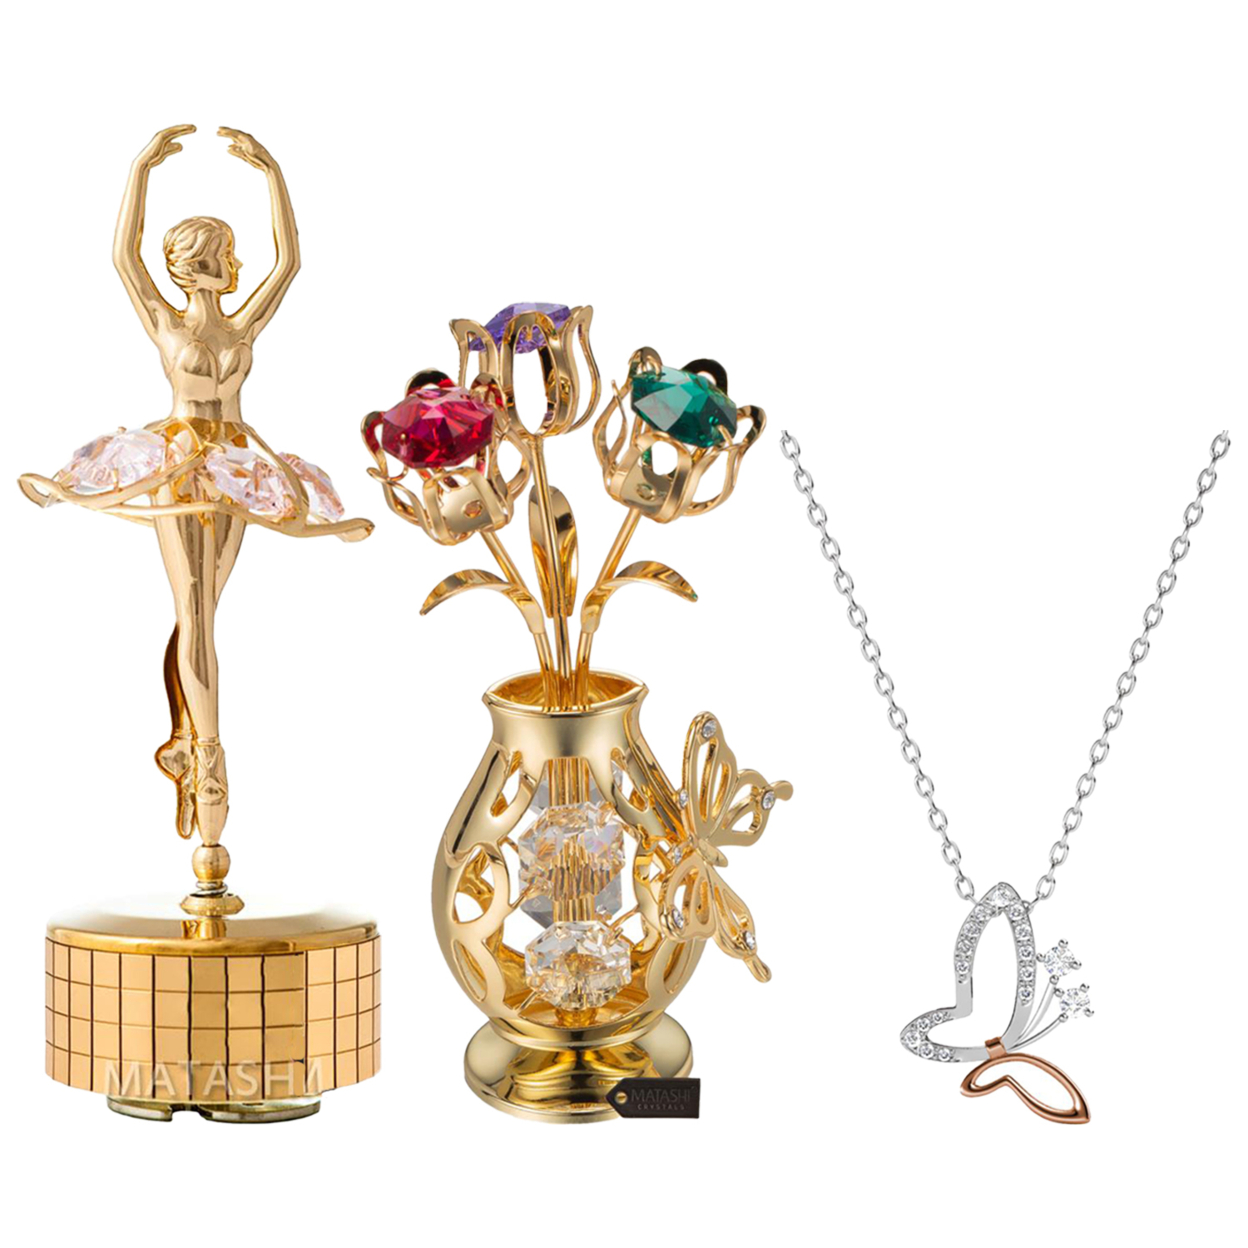 Matashi White Gold And Rose Gold Plated Butterfly Pendant Necklace With Wind-Up Music Box Plays - Swan Lake & Gold Plated Flowers Bouquet